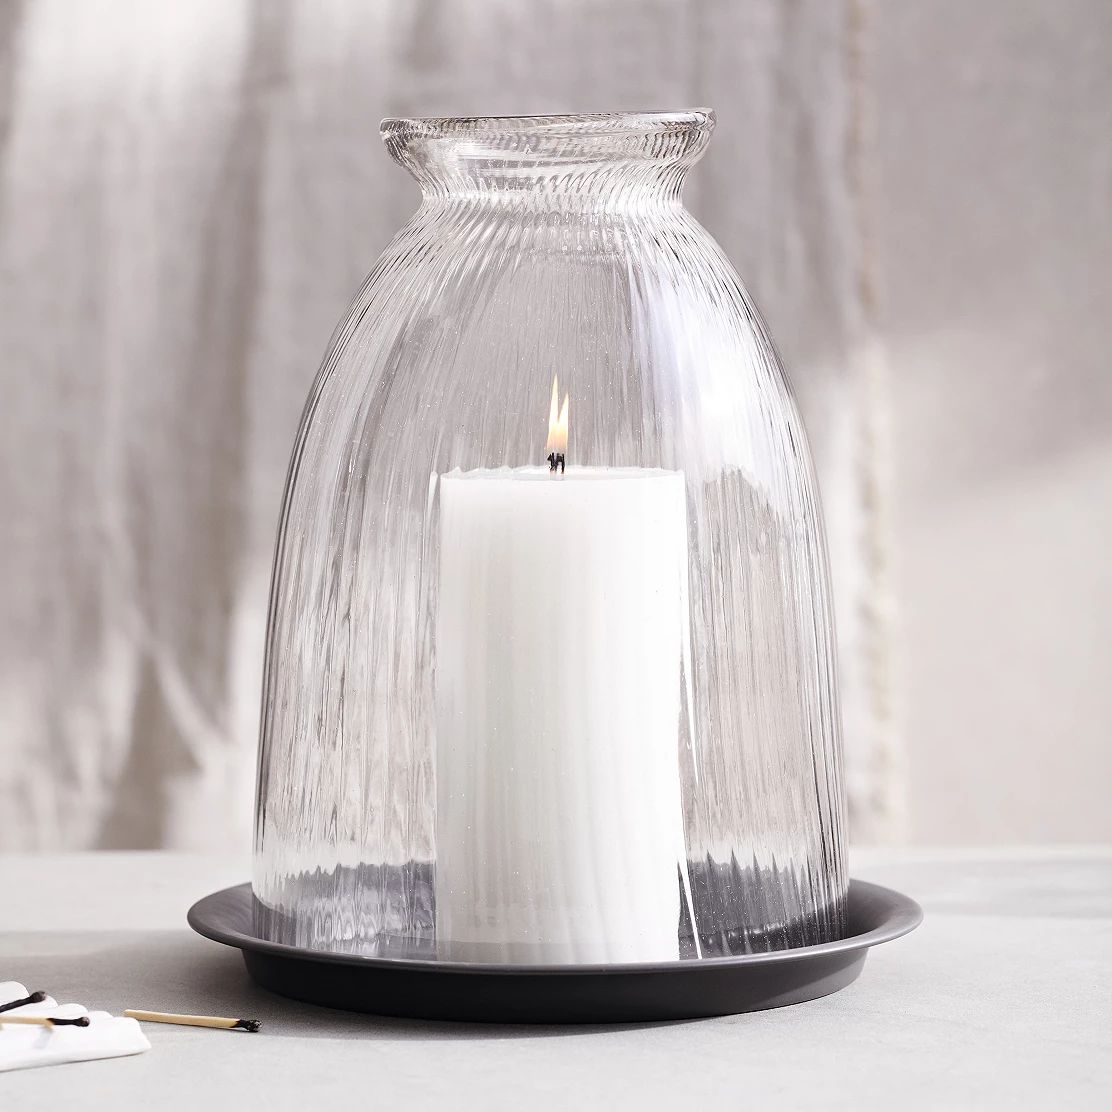 Domed Glass Candle Holder With Tray - Large | The White Company (UK)